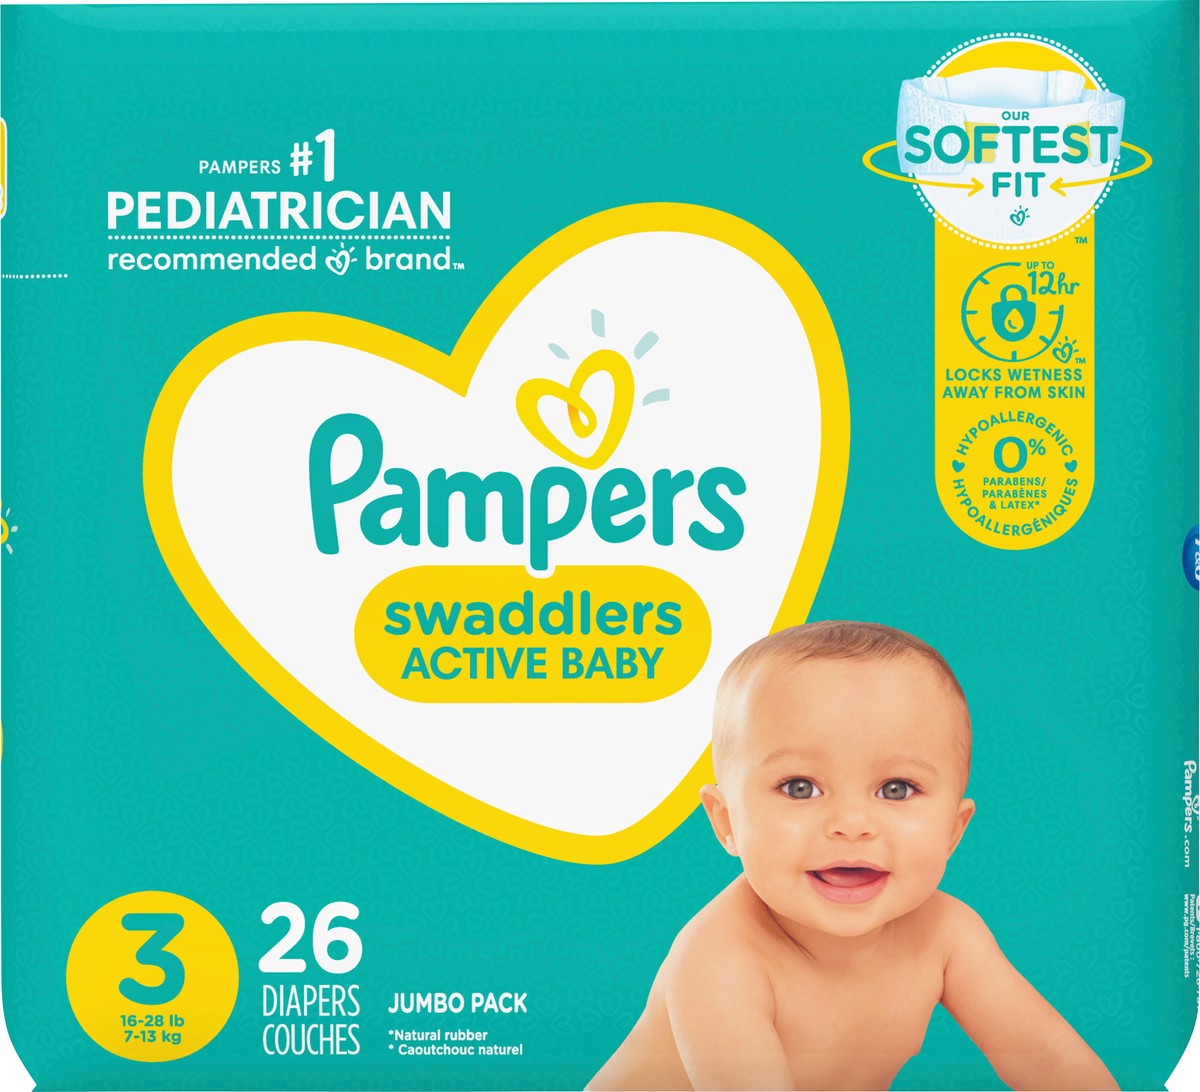 slide 4 of 4, Pampers Swaddlers Active Baby Diaper Size 3 26 Count, 26 ct